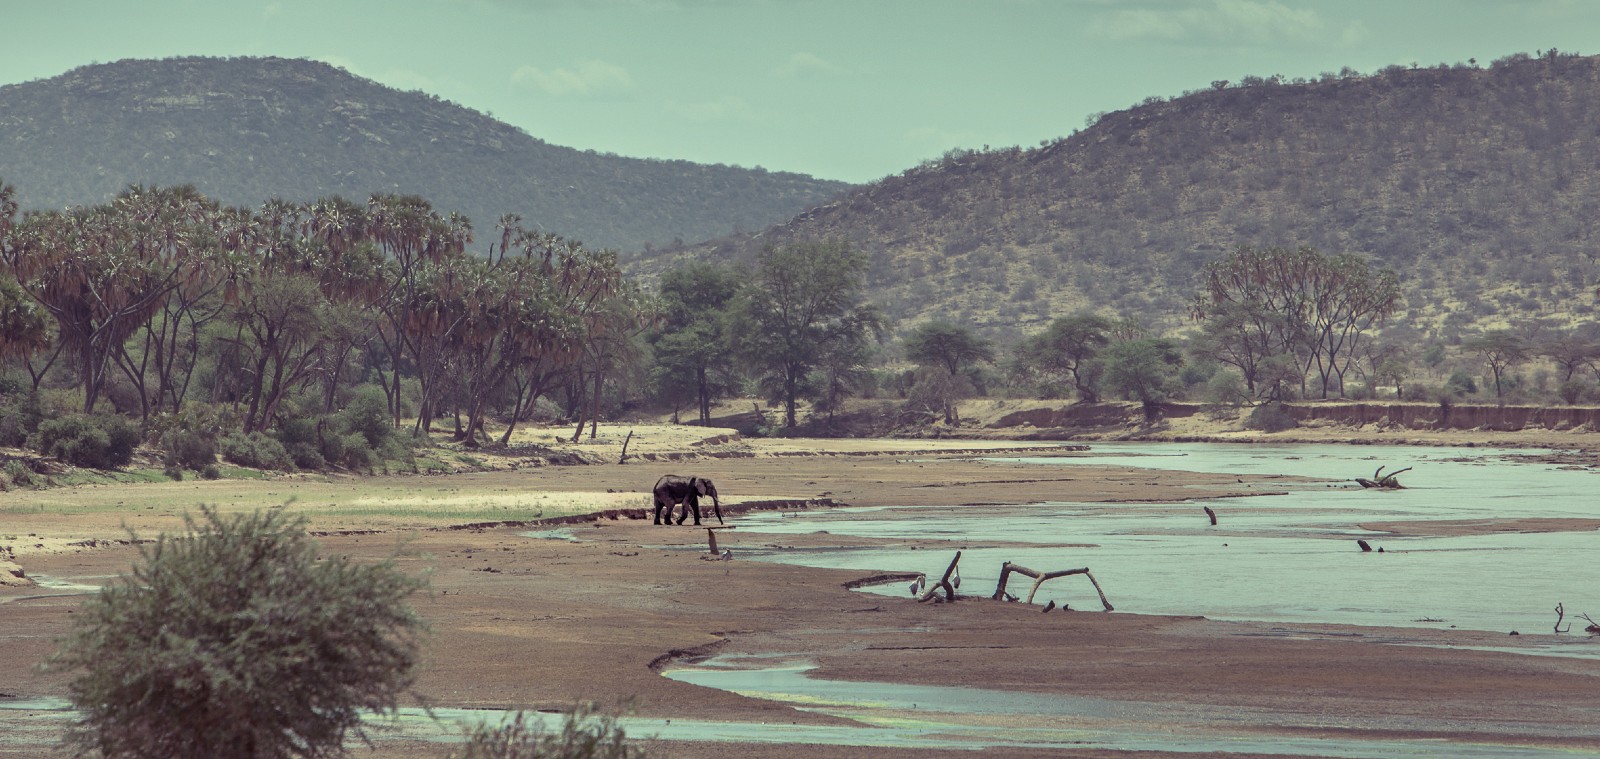 A wide landscape shot with blue sky, mountains and rivers, with a single elephant walking among bushes and fallen trees.